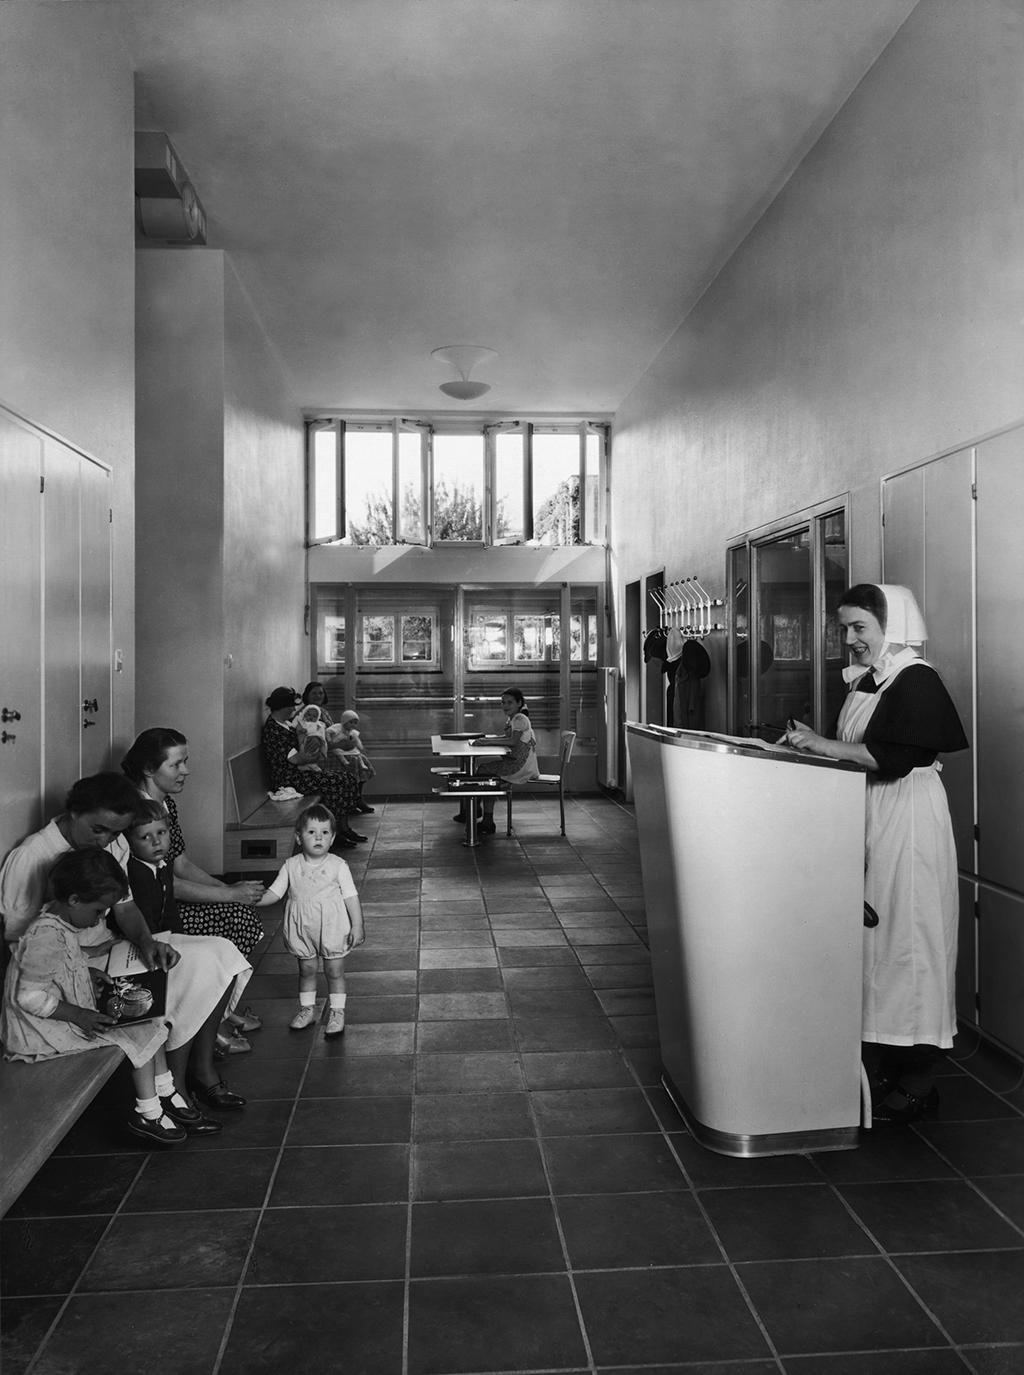 The entrance to a waiting area, children and women sitting to the left, to the right a woman dressed in a nurse uniform.